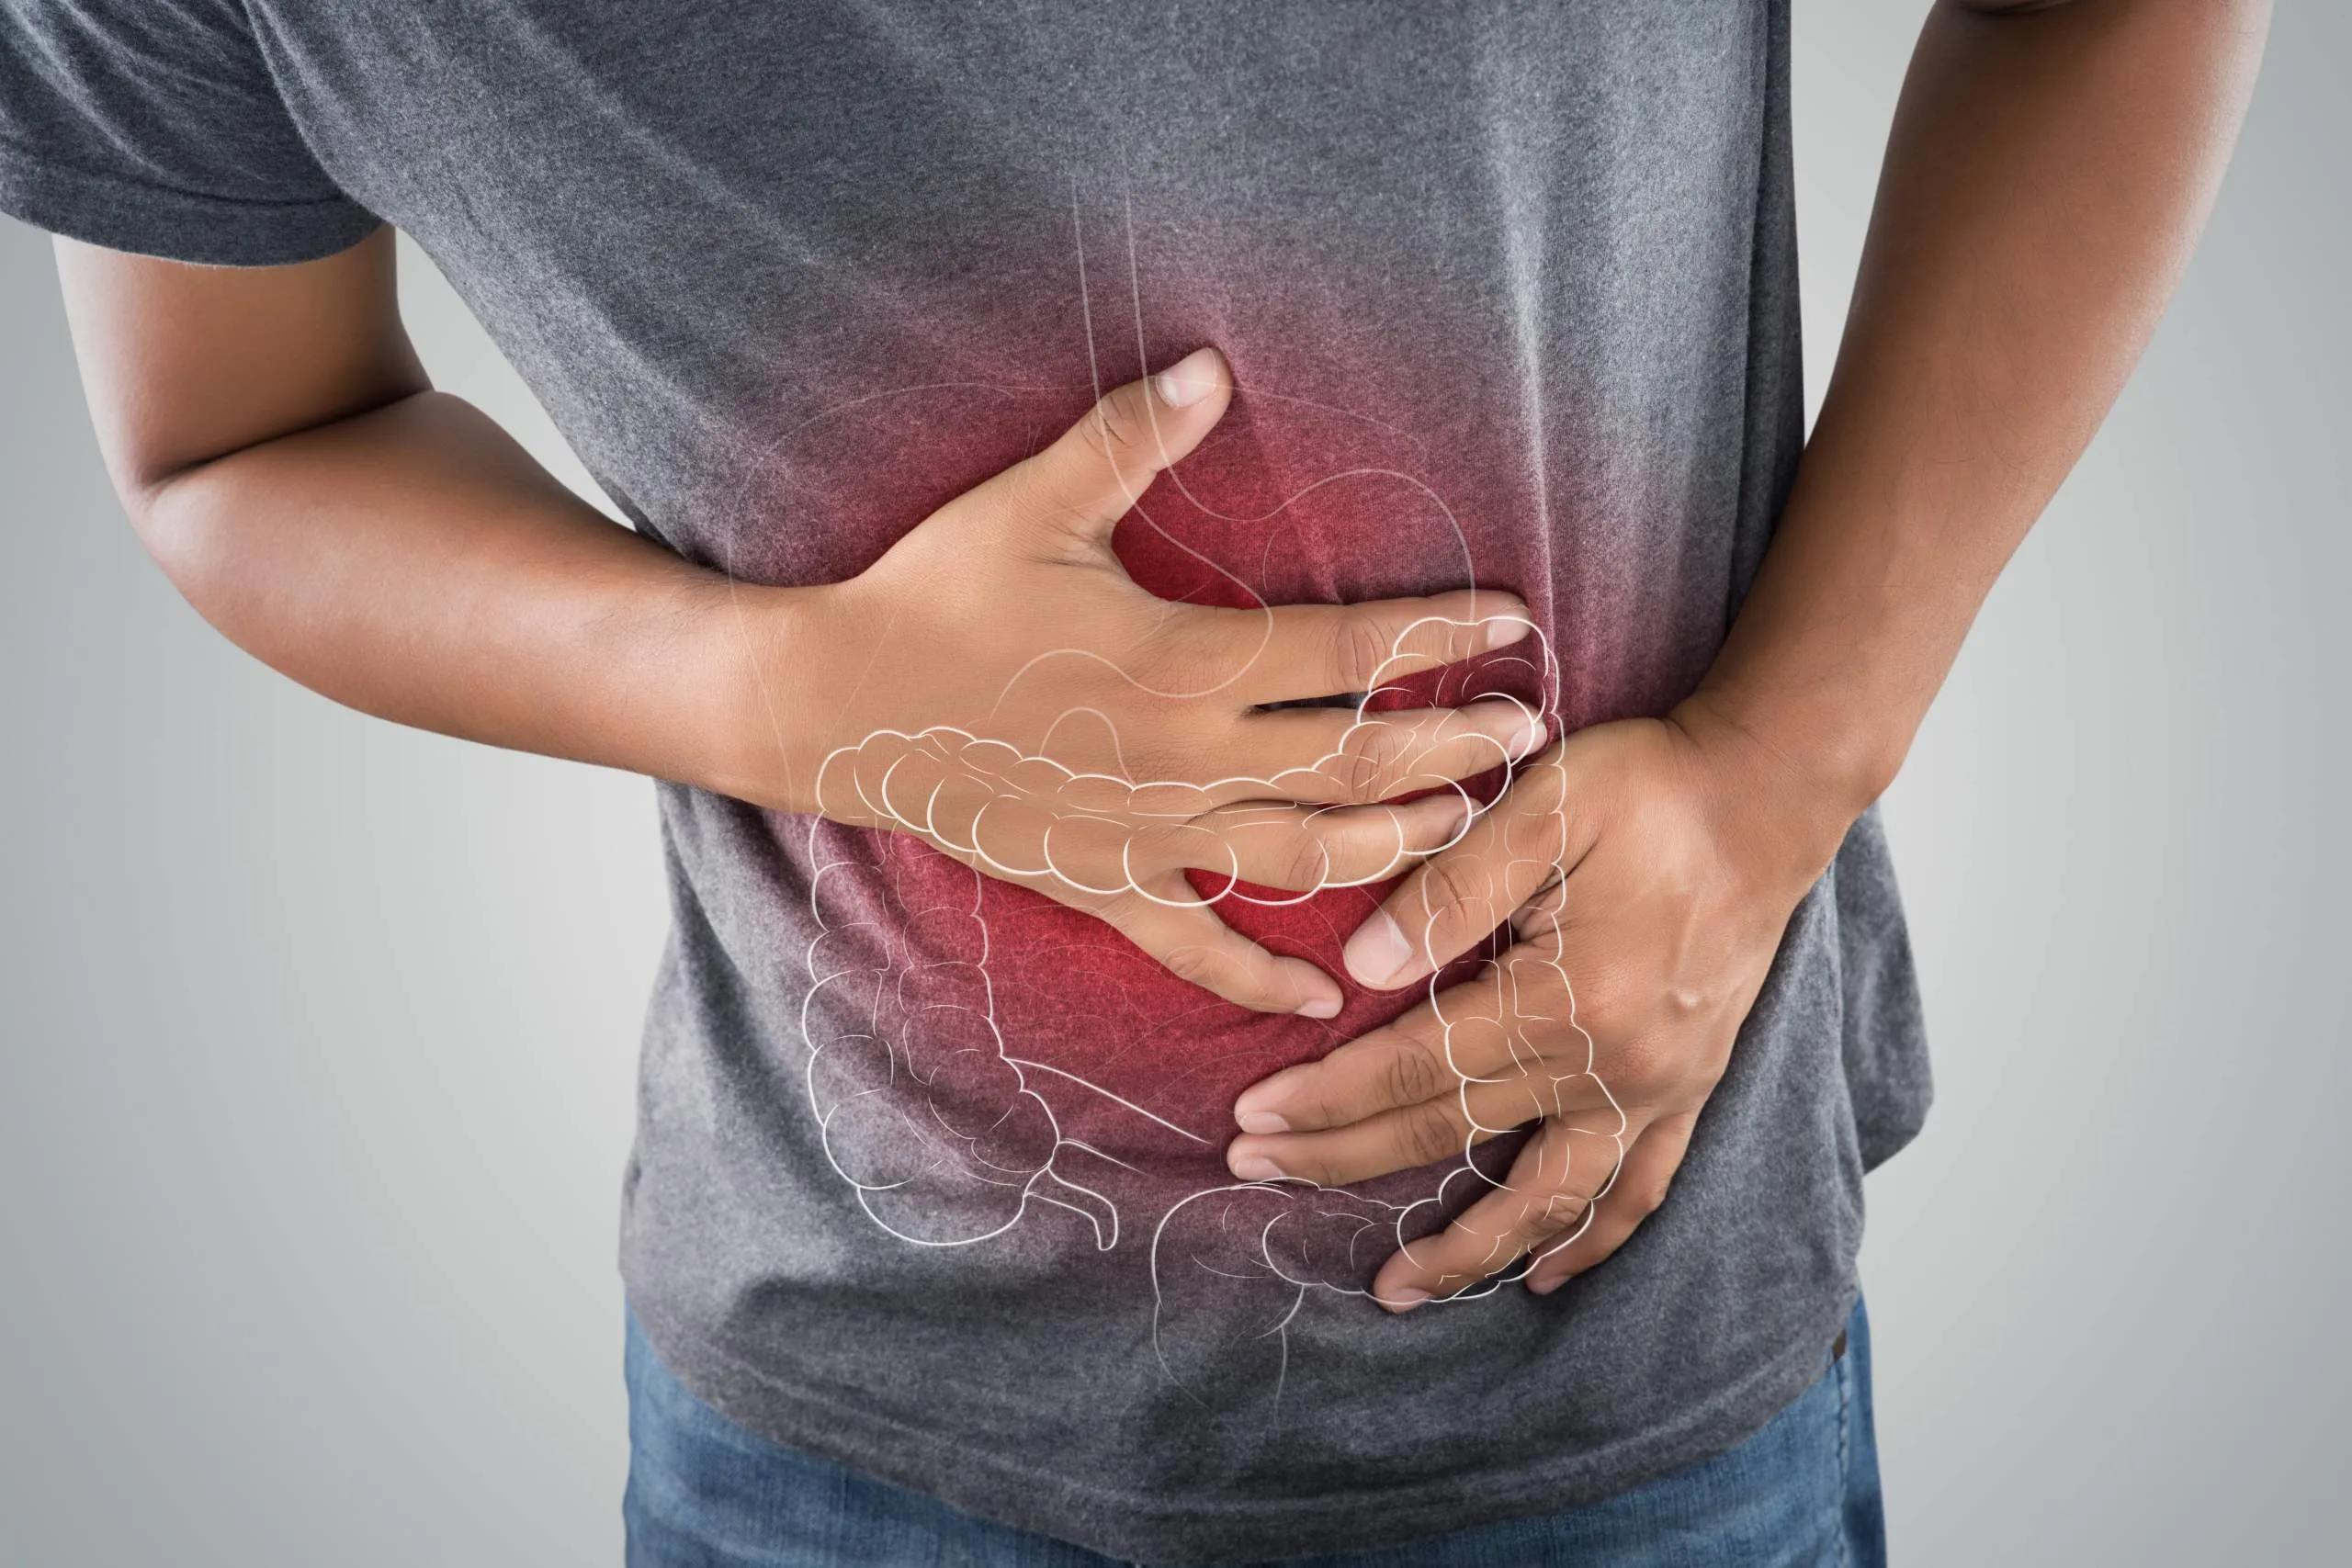 Are You Living With Ulcerative Colitis?